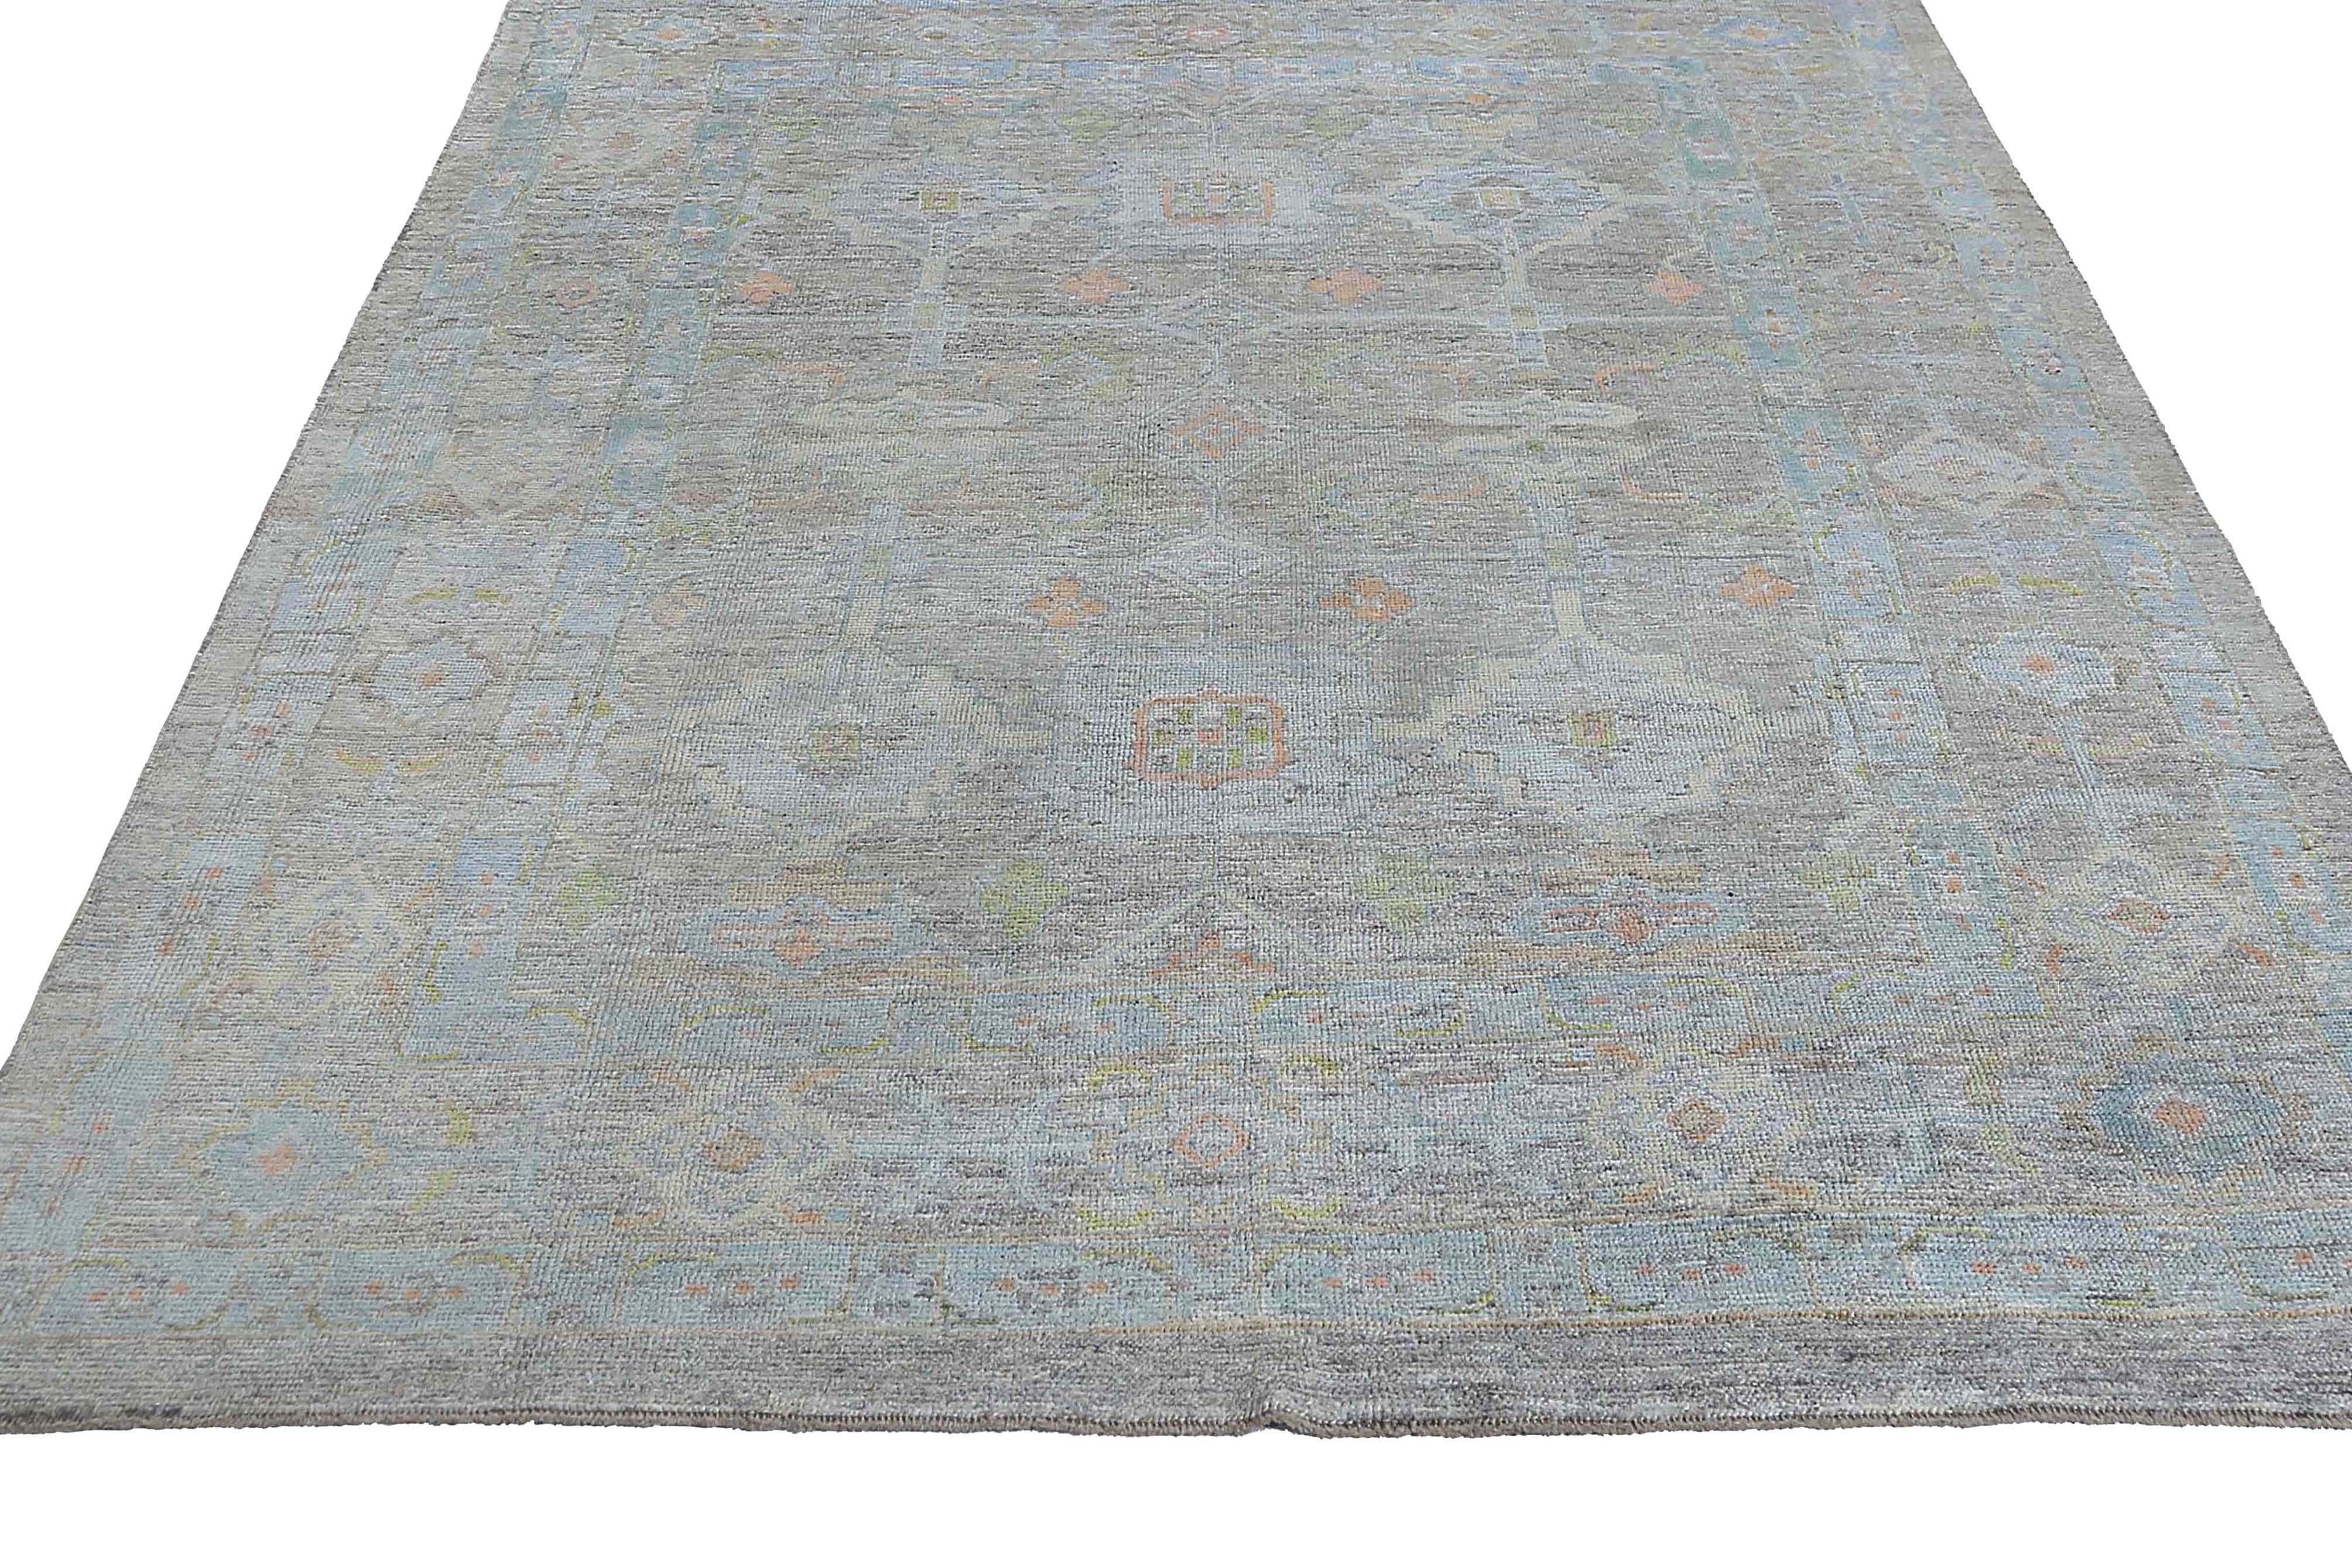 Introducing our beautiful Turkish Oushak rug in a stunning size of 8'6'' x 11'6'' that is sure to add a touch of elegance to any room. Crafted in the tradition of the Oushak region in Turkey, this rug features a classic design with a modern twist,